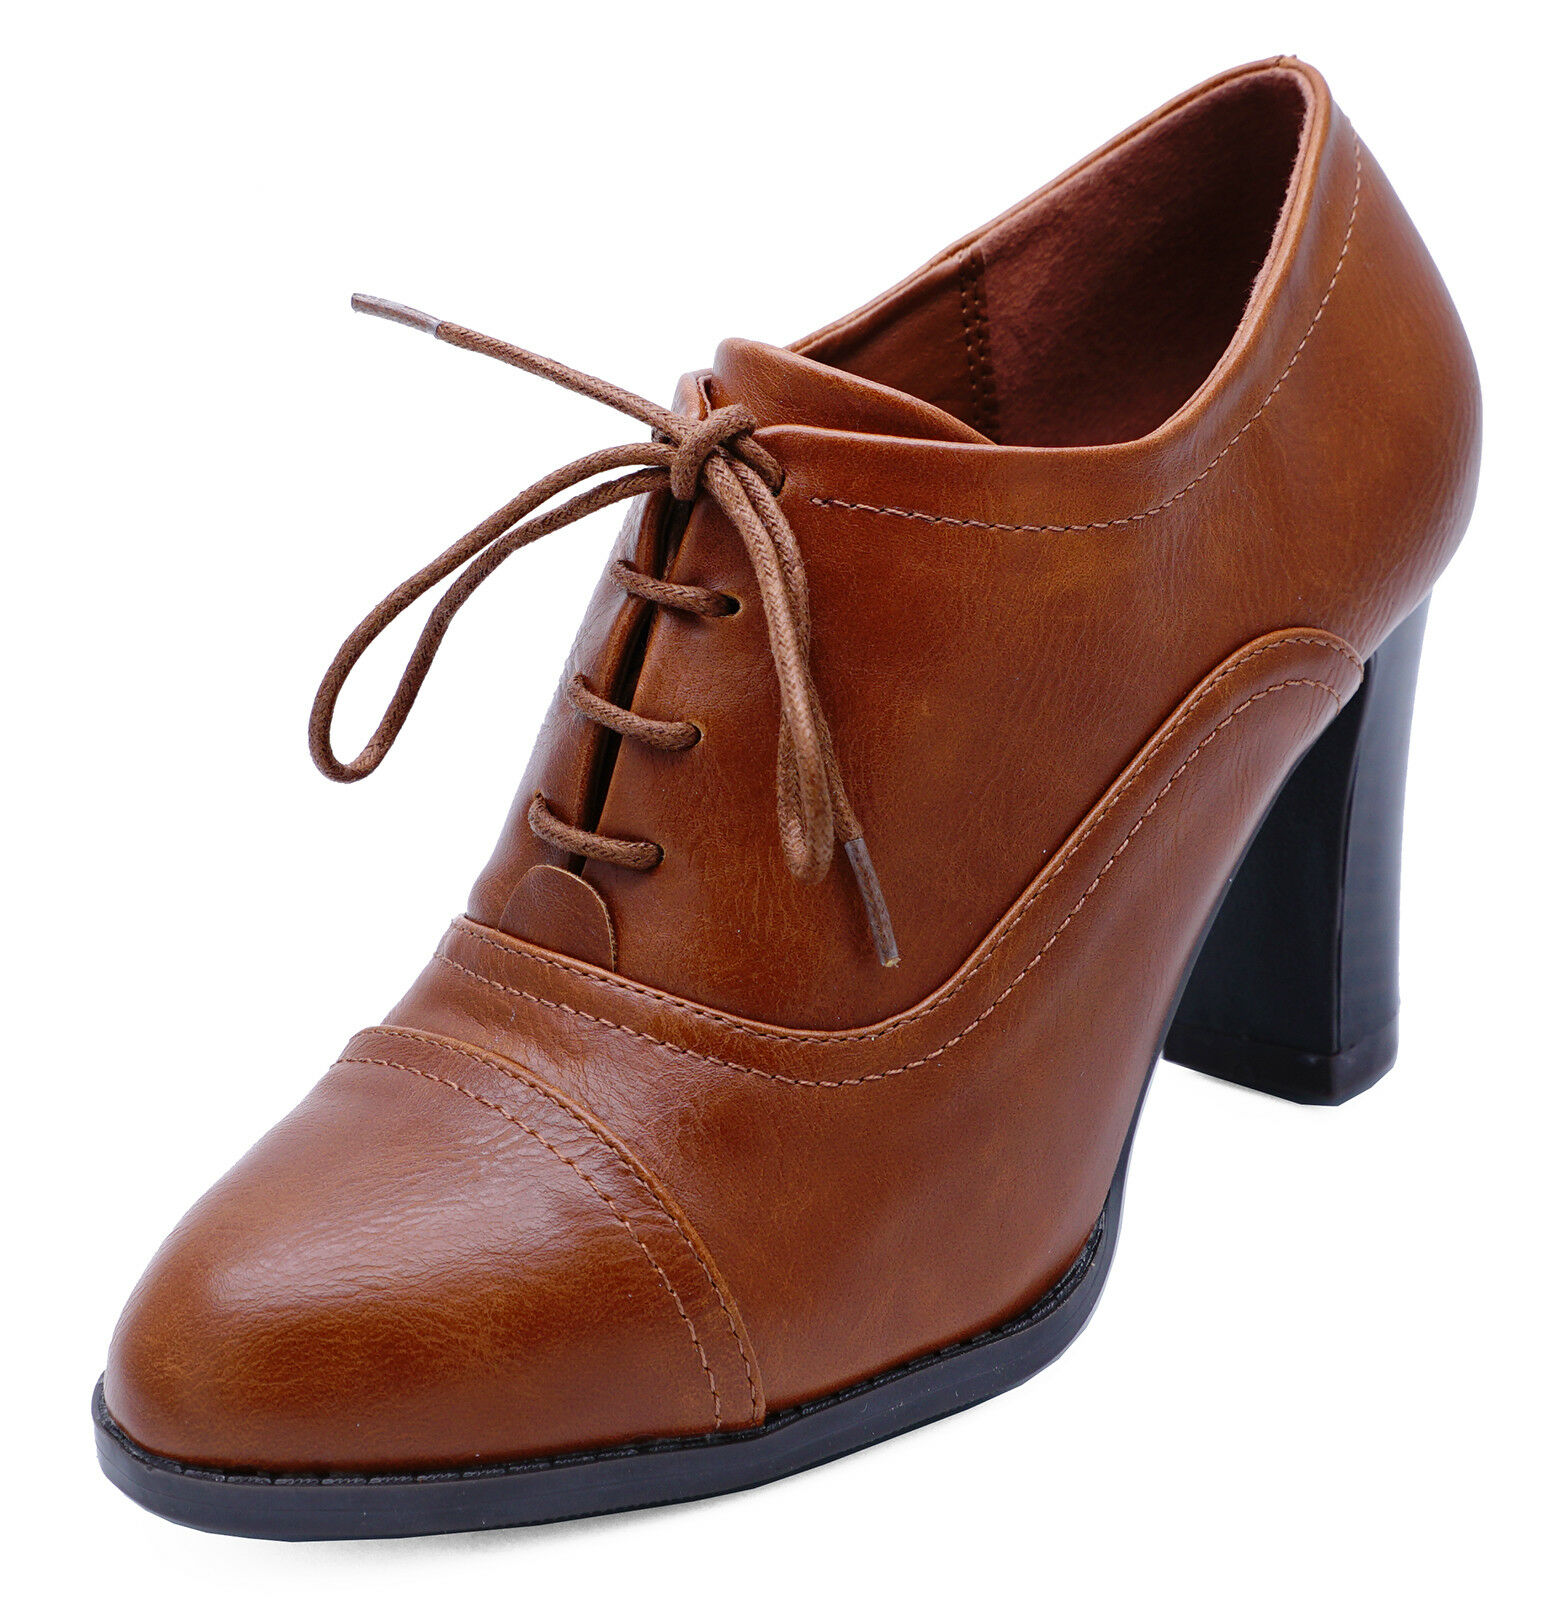 62 Casual Brown comfy shoes for Women